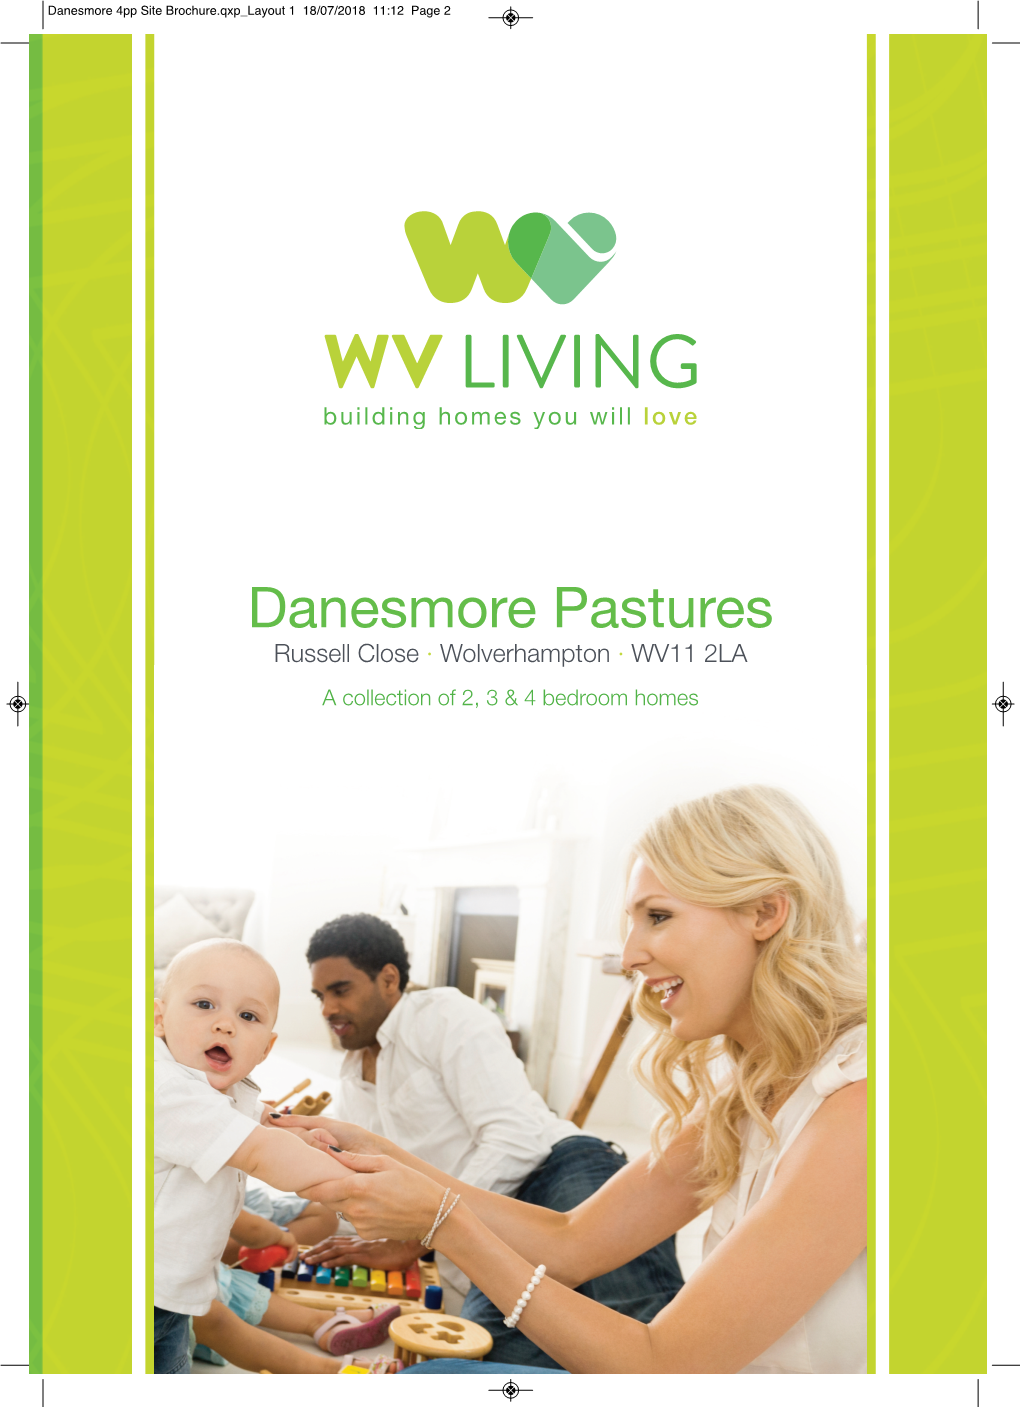 Danesmore Pastures Russell Close · Wolverhampton · WV11 2LA a Collection of 2, 3 & 4 Bedroom Homes